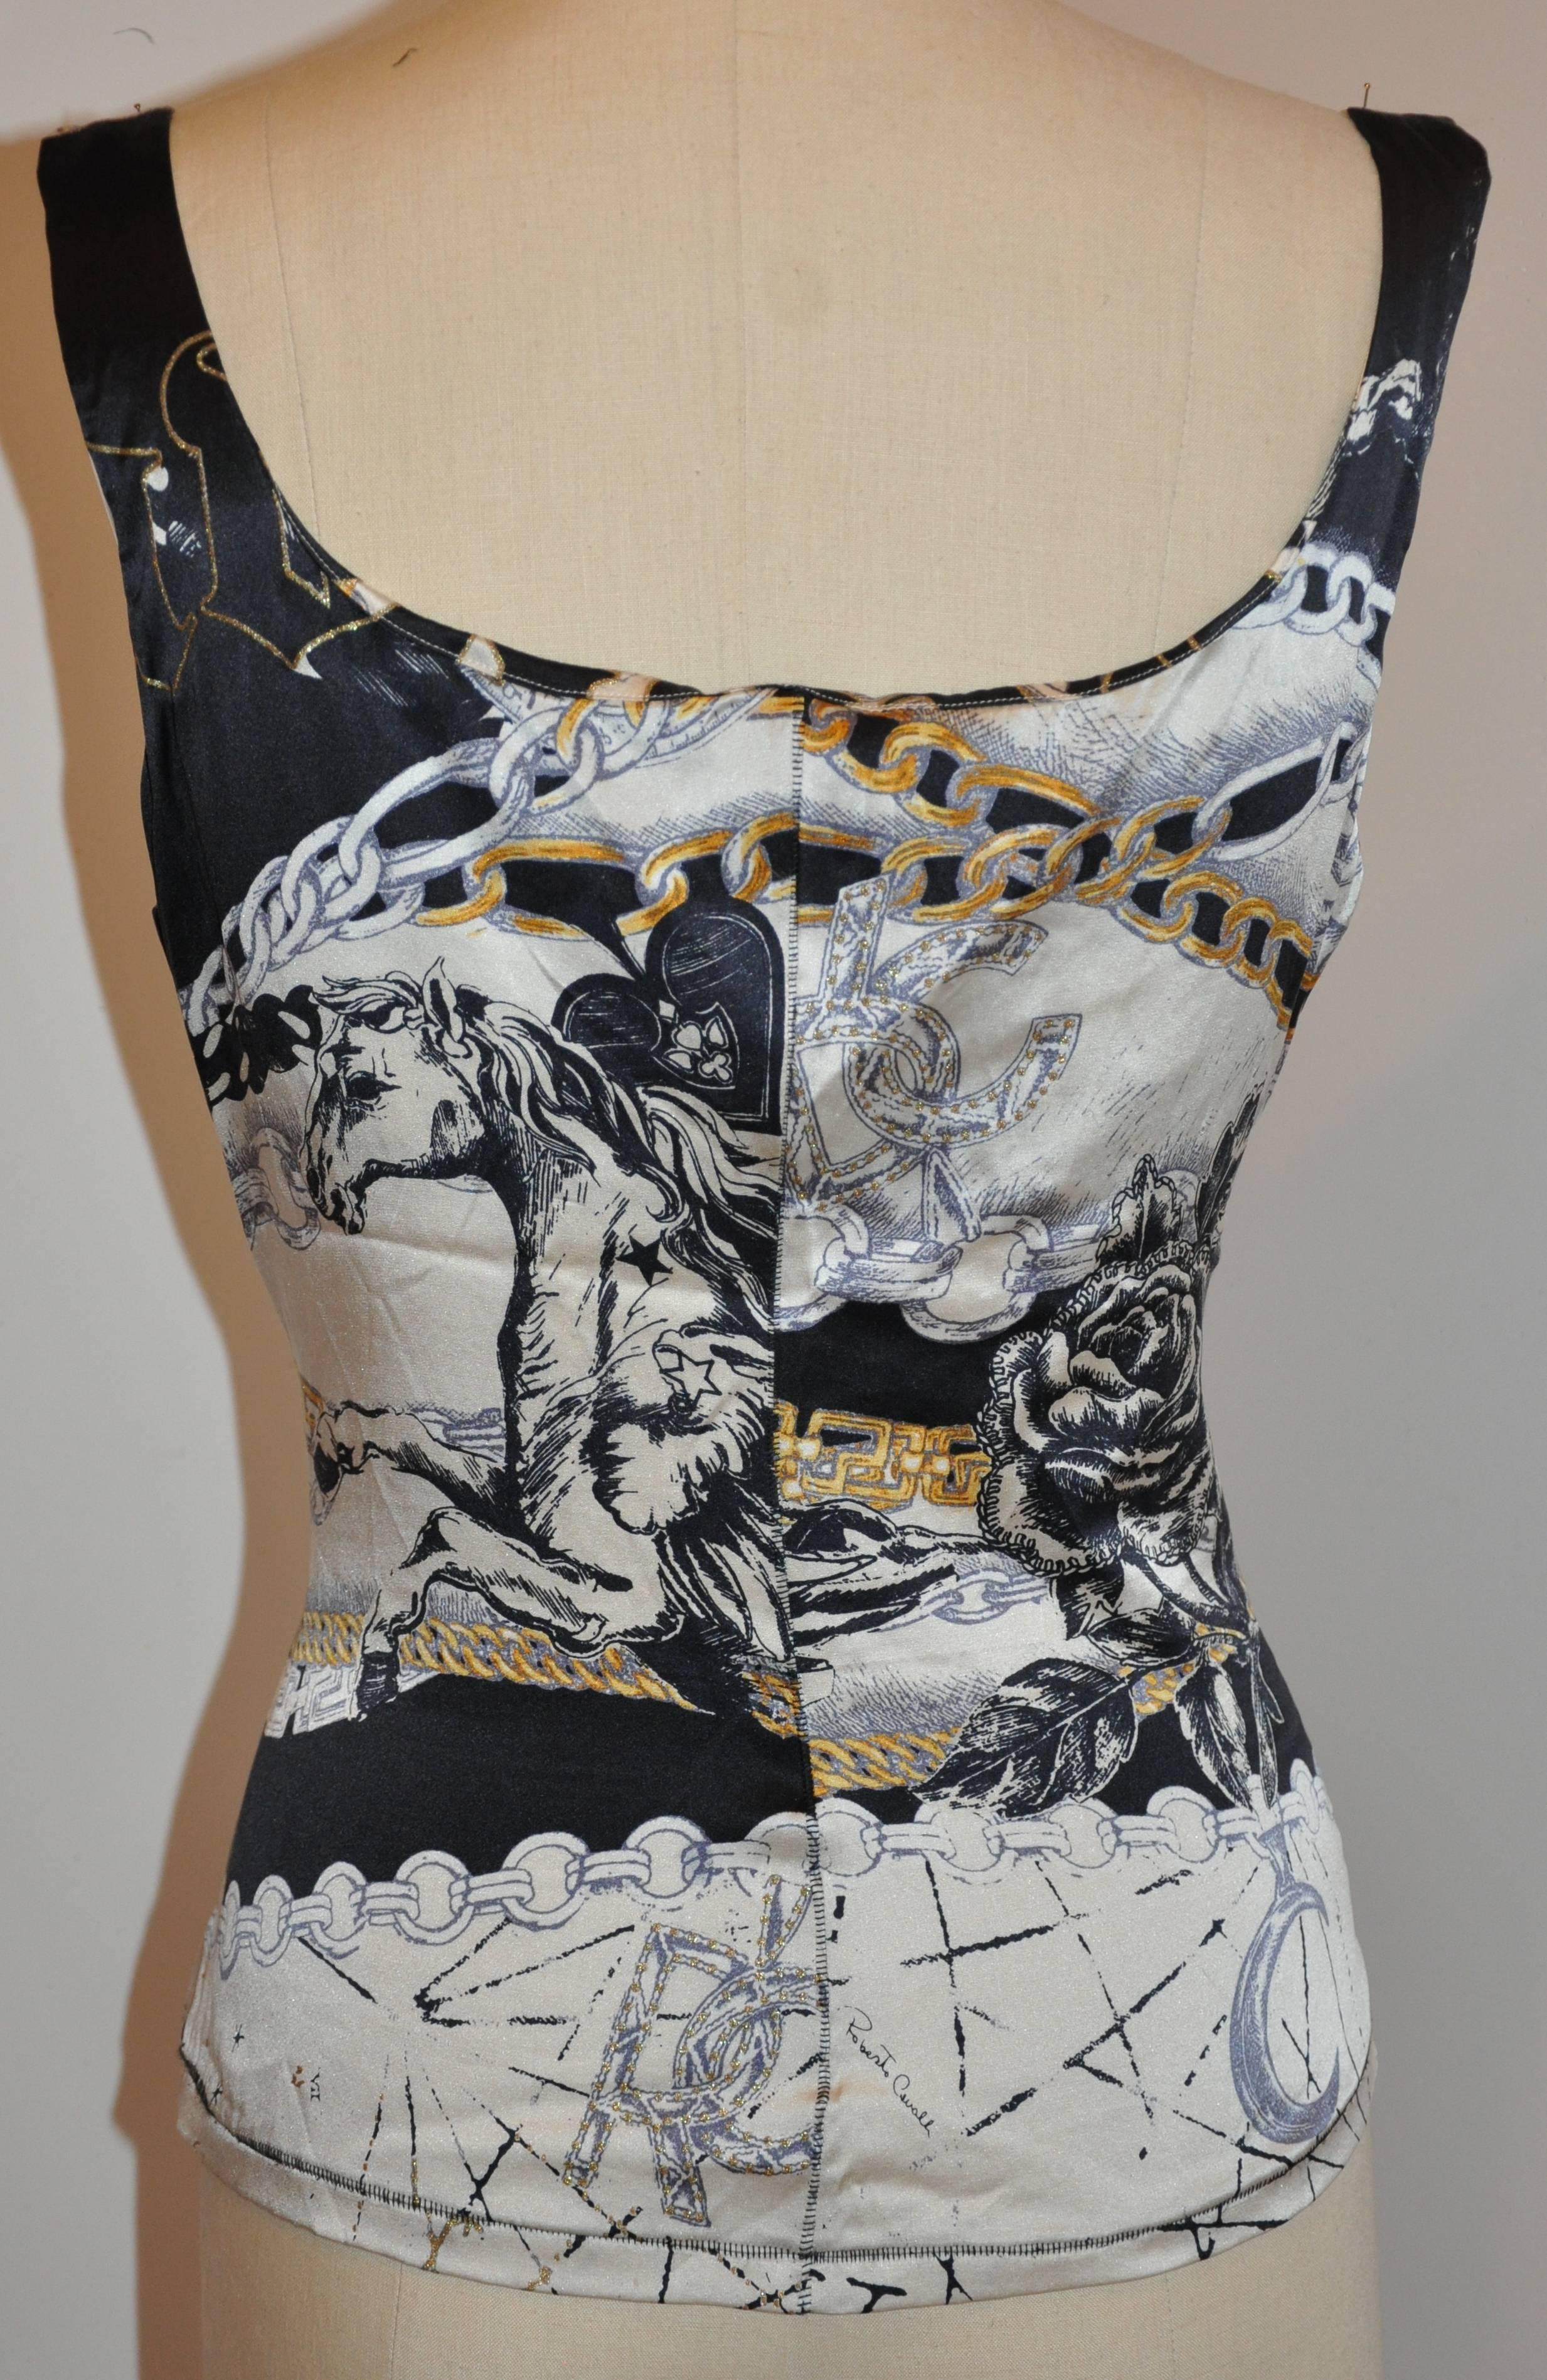         Roberto Cavalli's wonderful whimsical multi-print accented with a drawstring tie-front of gold lame has his signature within the print on both front and back. The top's material is of silk blended with Lycra to create a body-hugging fit